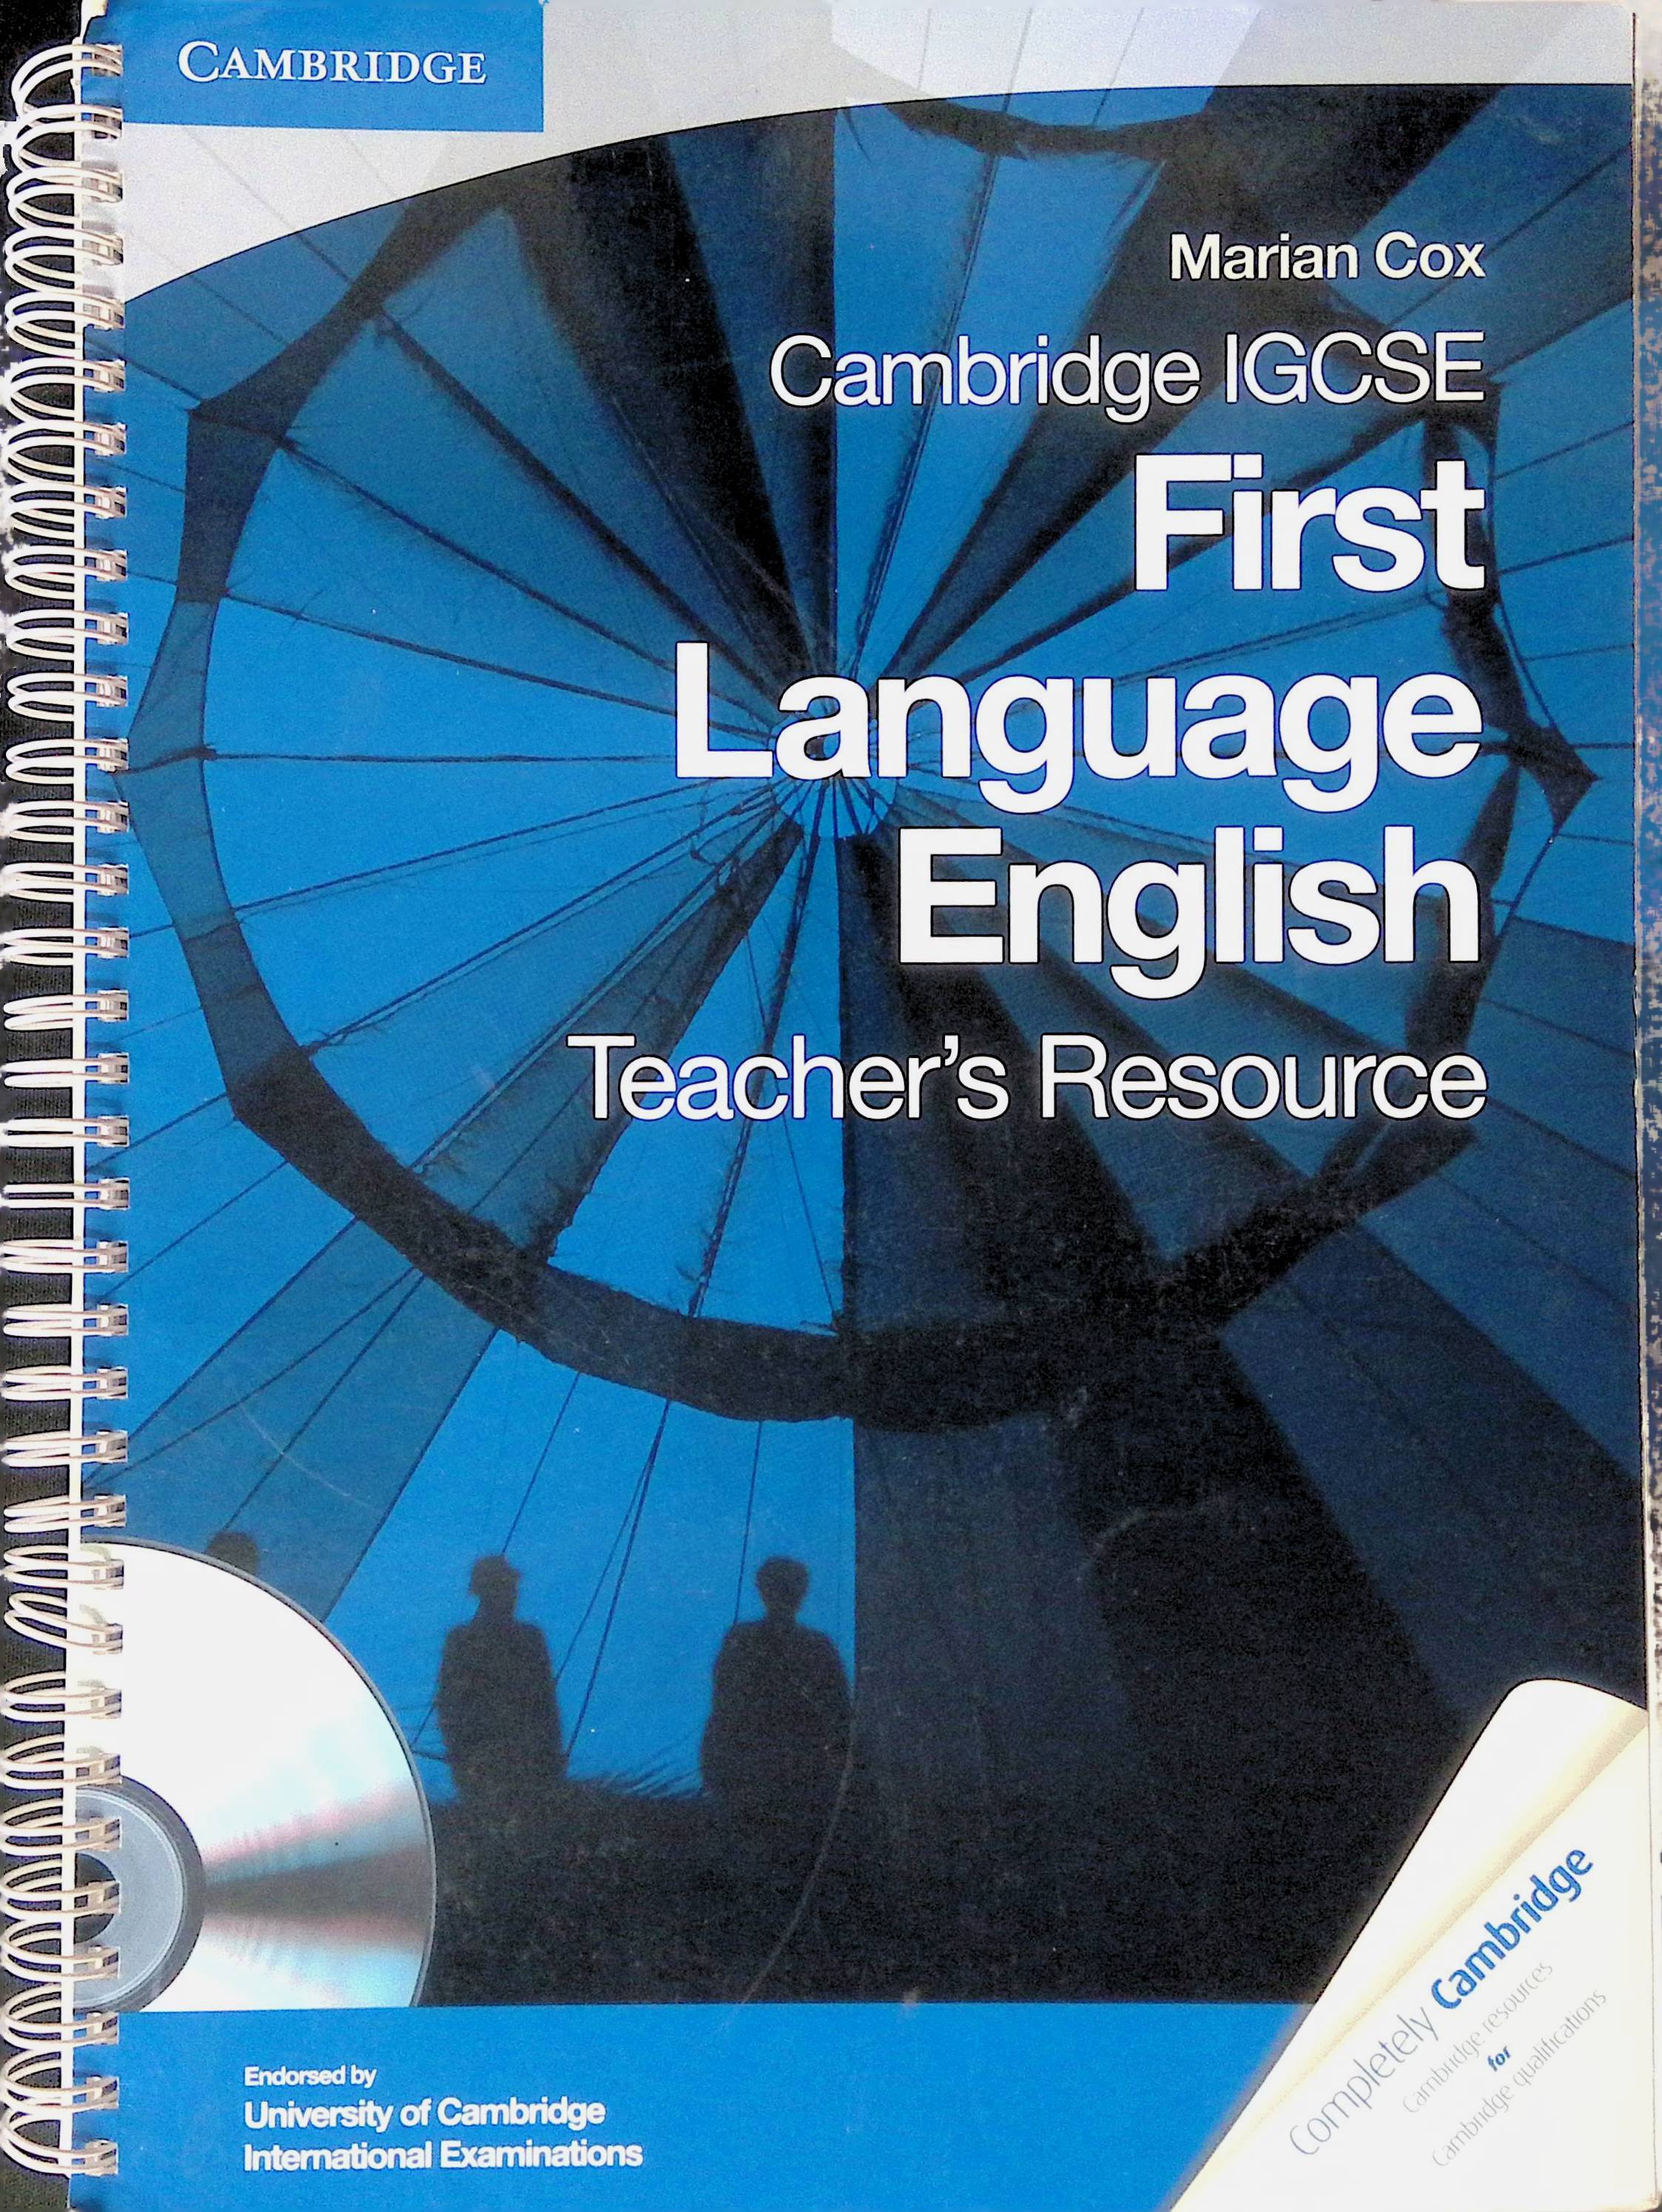 First language teaching. Cambridge English for Scientists. Recycling Intermediate English. Teaching English book Cover. Books for english teachers